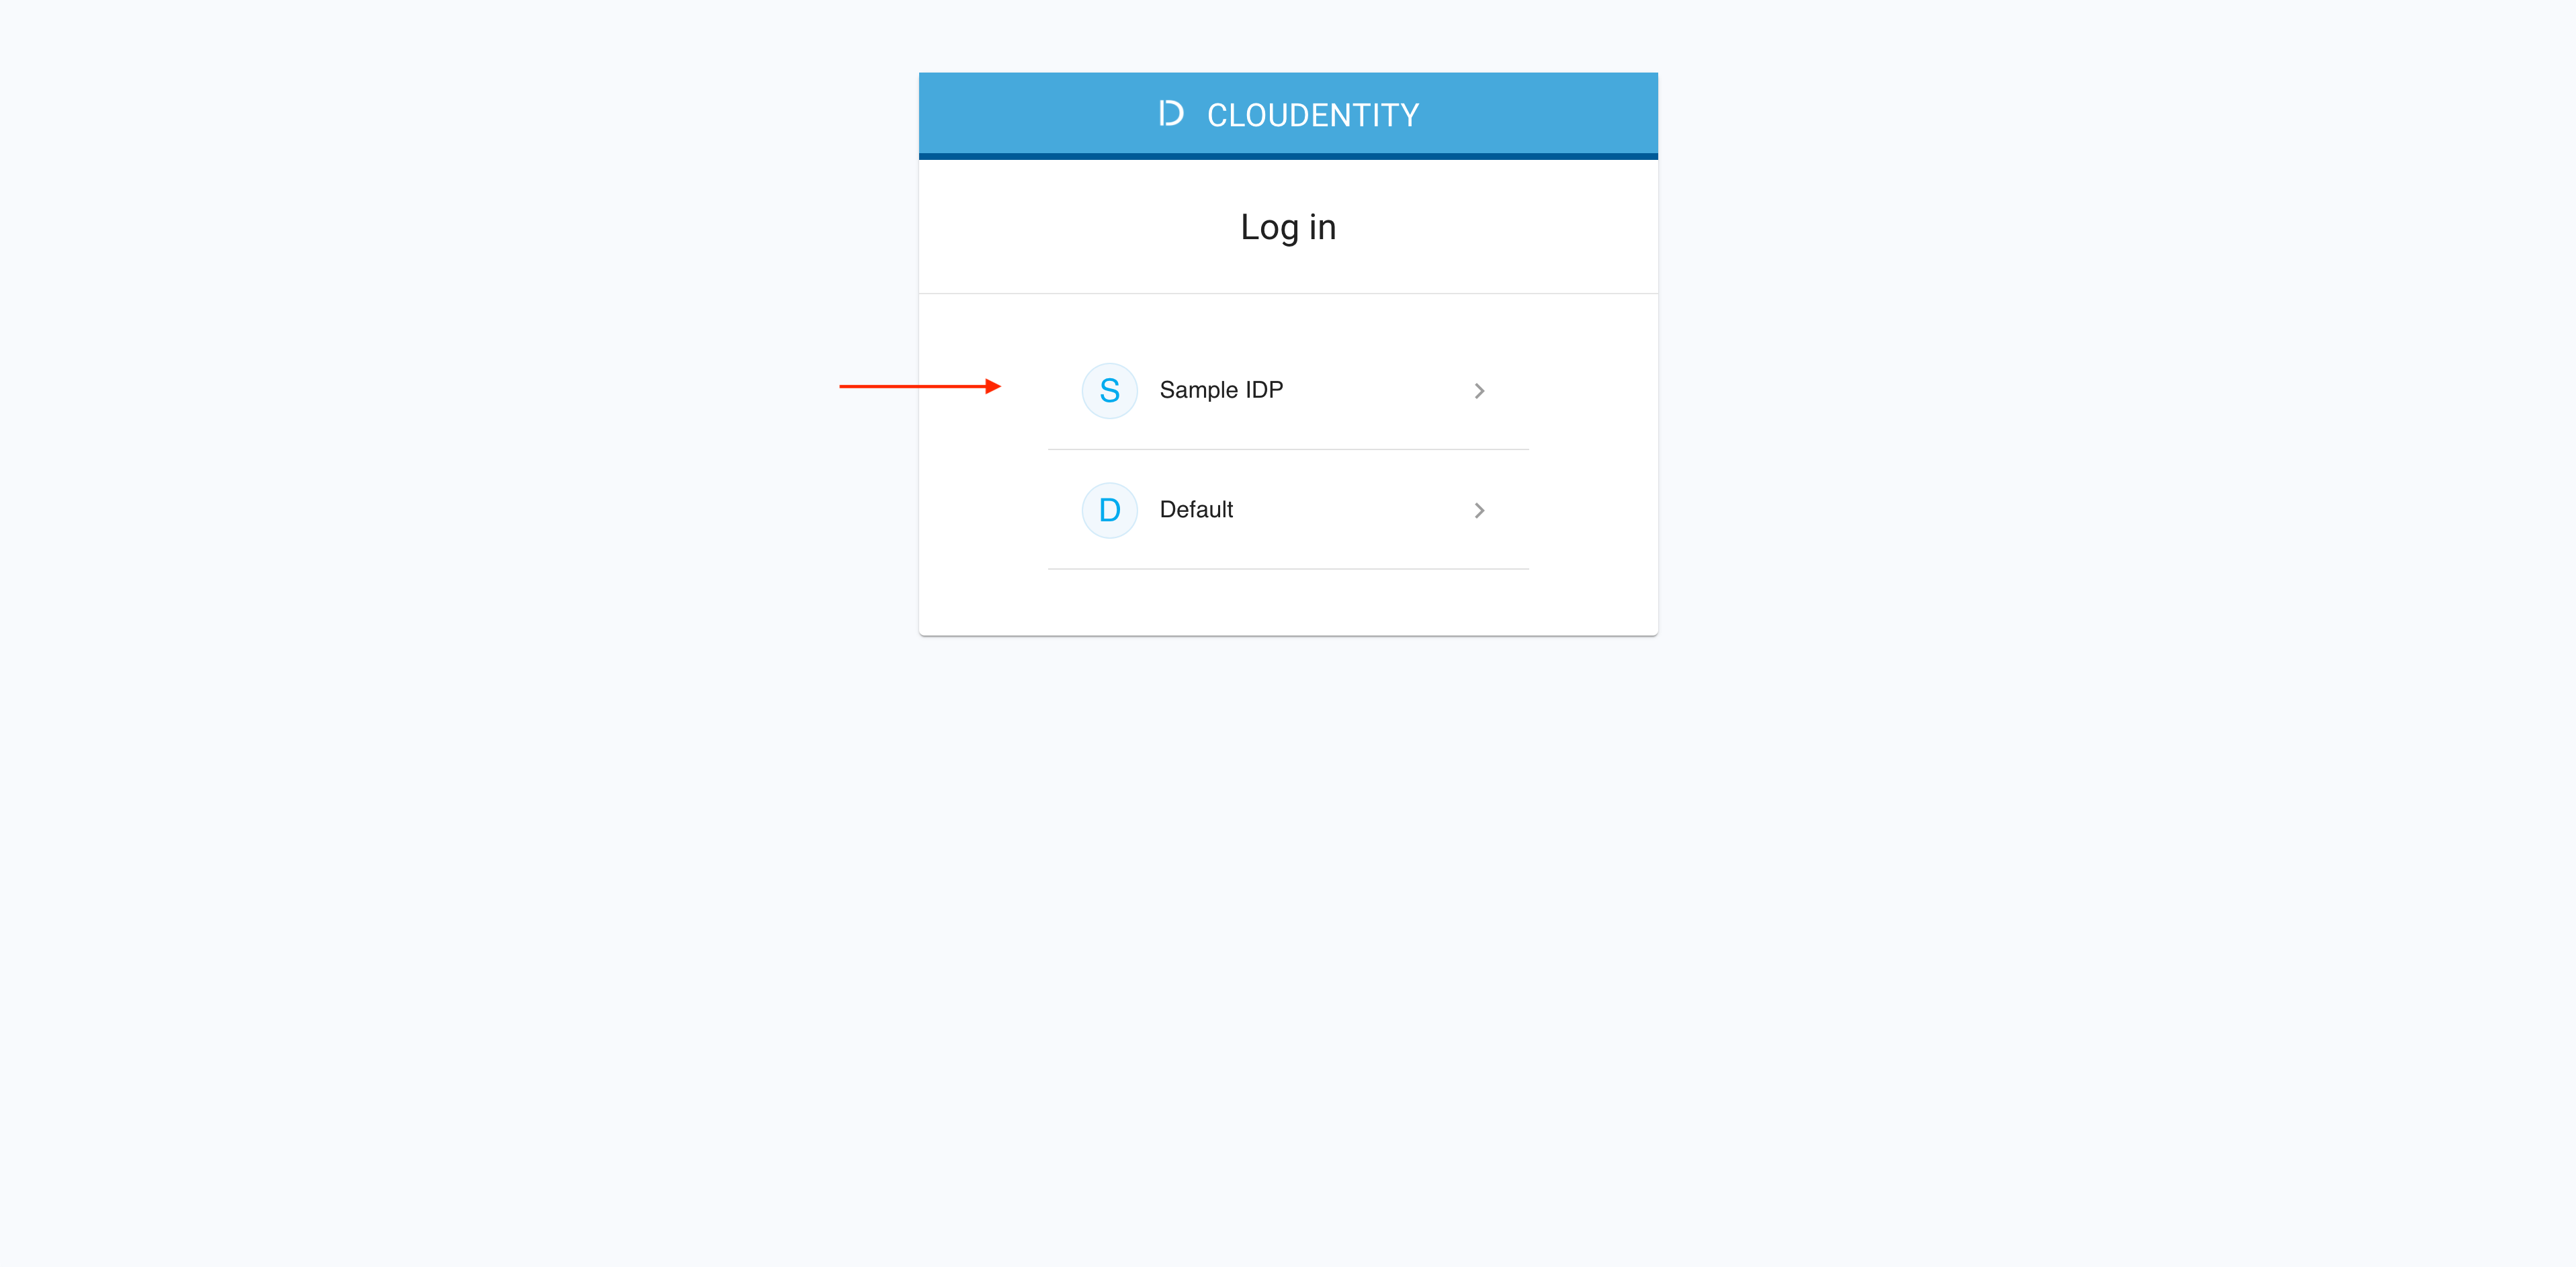 Selecting the new IDP for logging in with